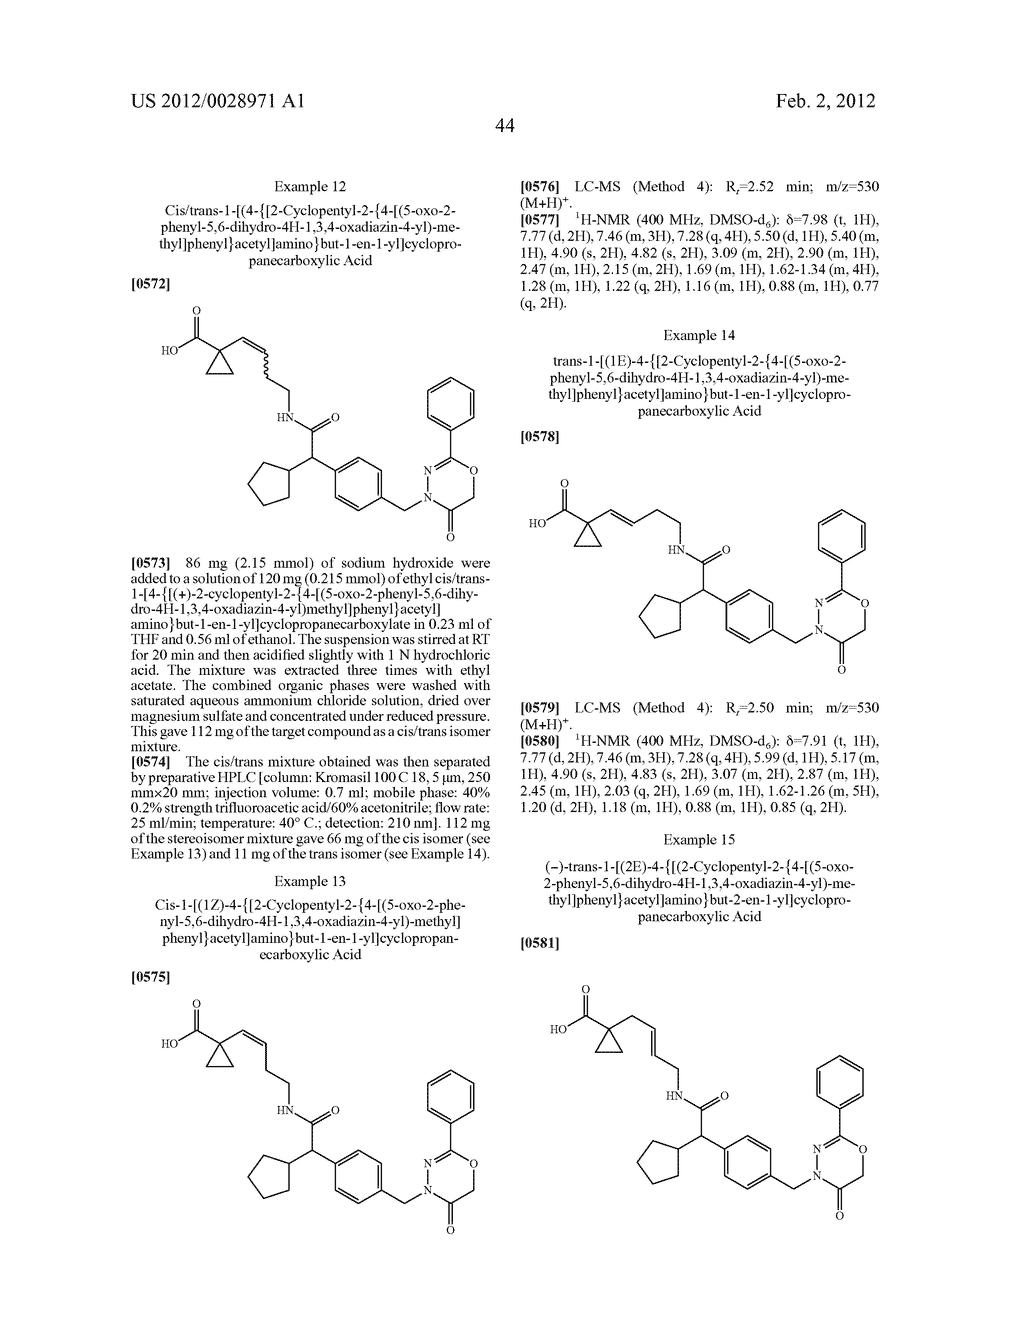 OXO-HETEROCYCLICALLY SUBSTITUTED ALKYL CARBOXYLIC ACIDS AND USE THEREOF - diagram, schematic, and image 45